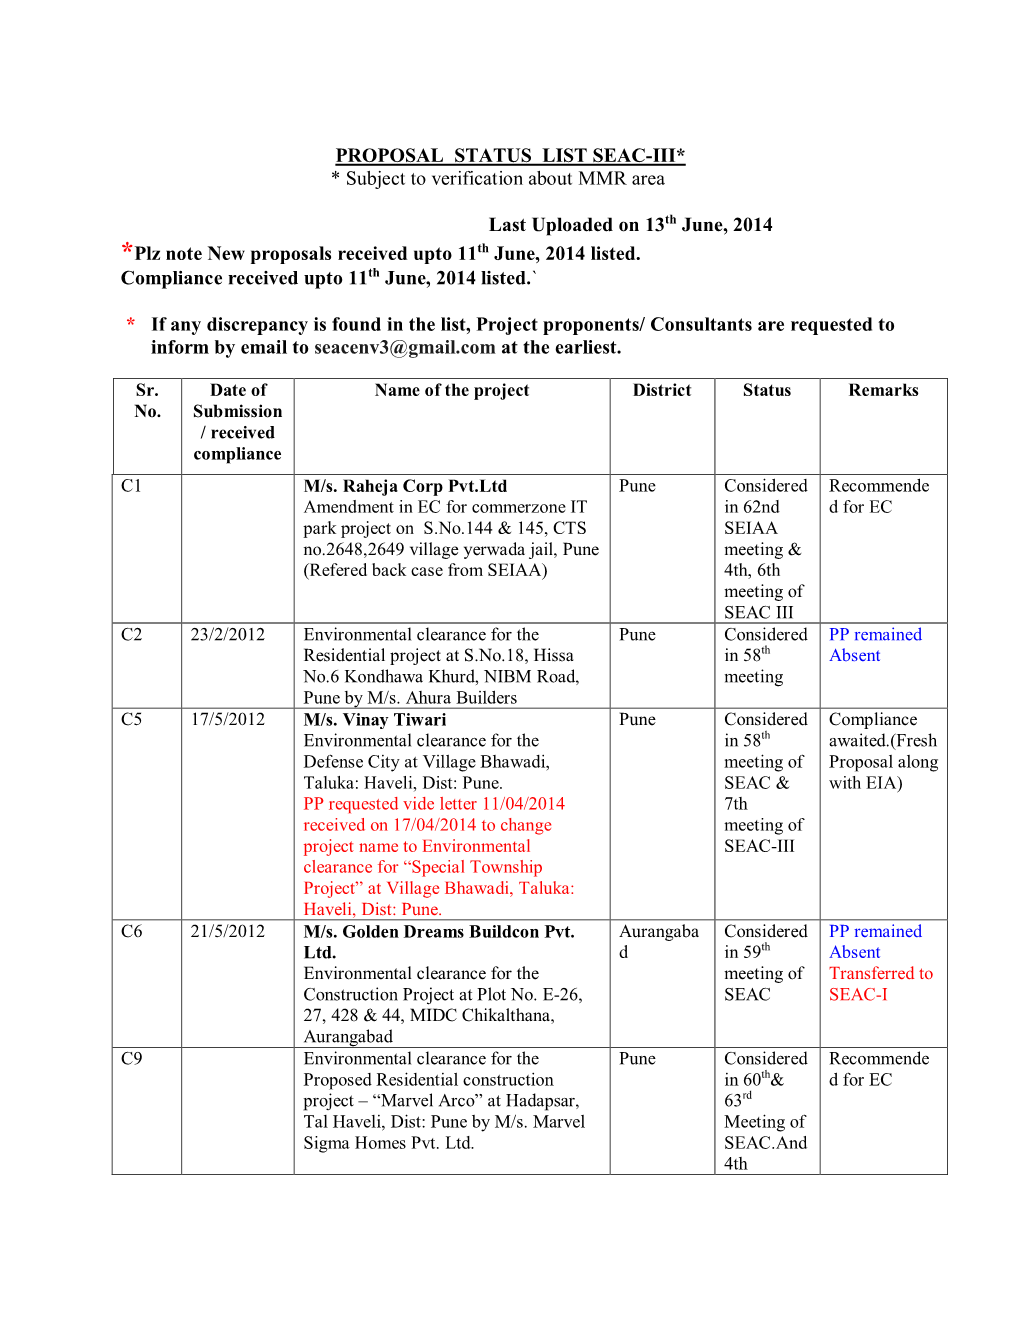 PROPOSAL STATUS LIST SEAC-III* * Subject to Verification About MMR Area Last Uploaded on 13Th June, 2014 *Plz Note New Proposa